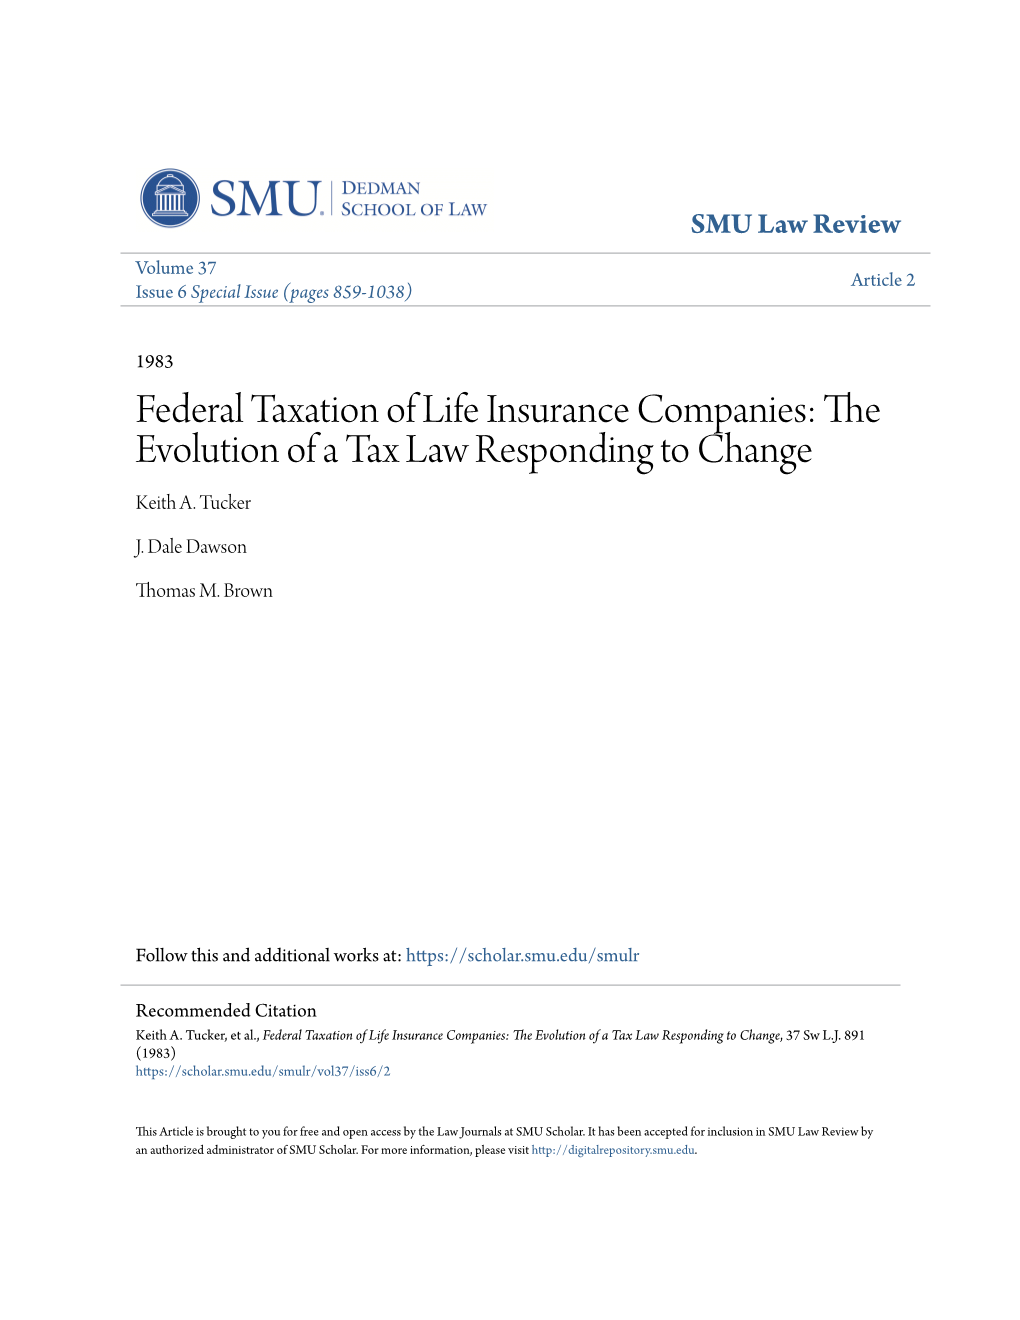 Federal Taxation of Life Insurance Companies: the Evolution of a Tax Law Responding to Change Keith A